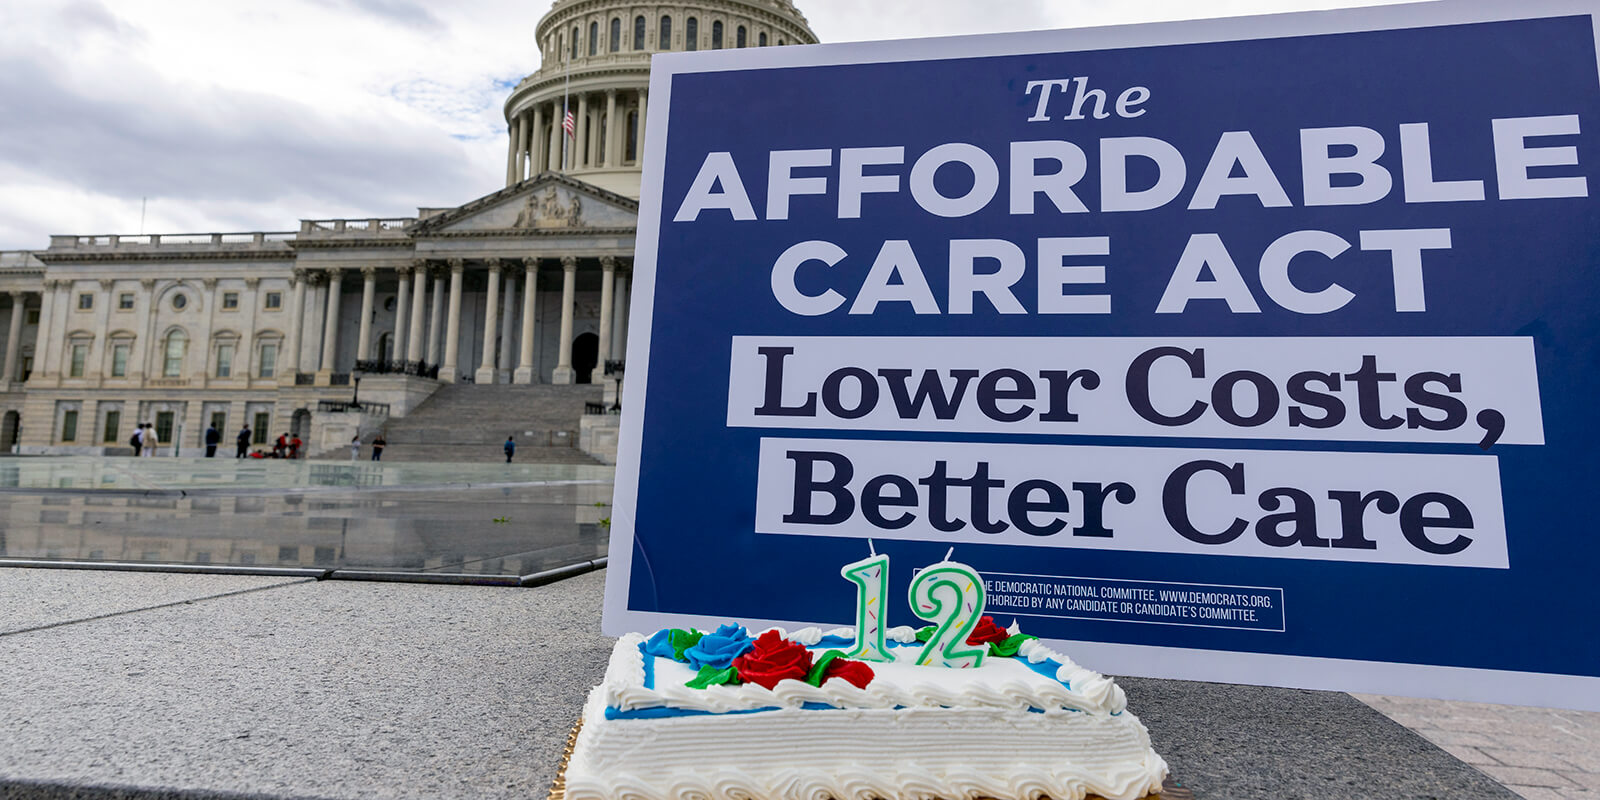 On the 12th anniversary of the ACA, taking stock of its immense benefits